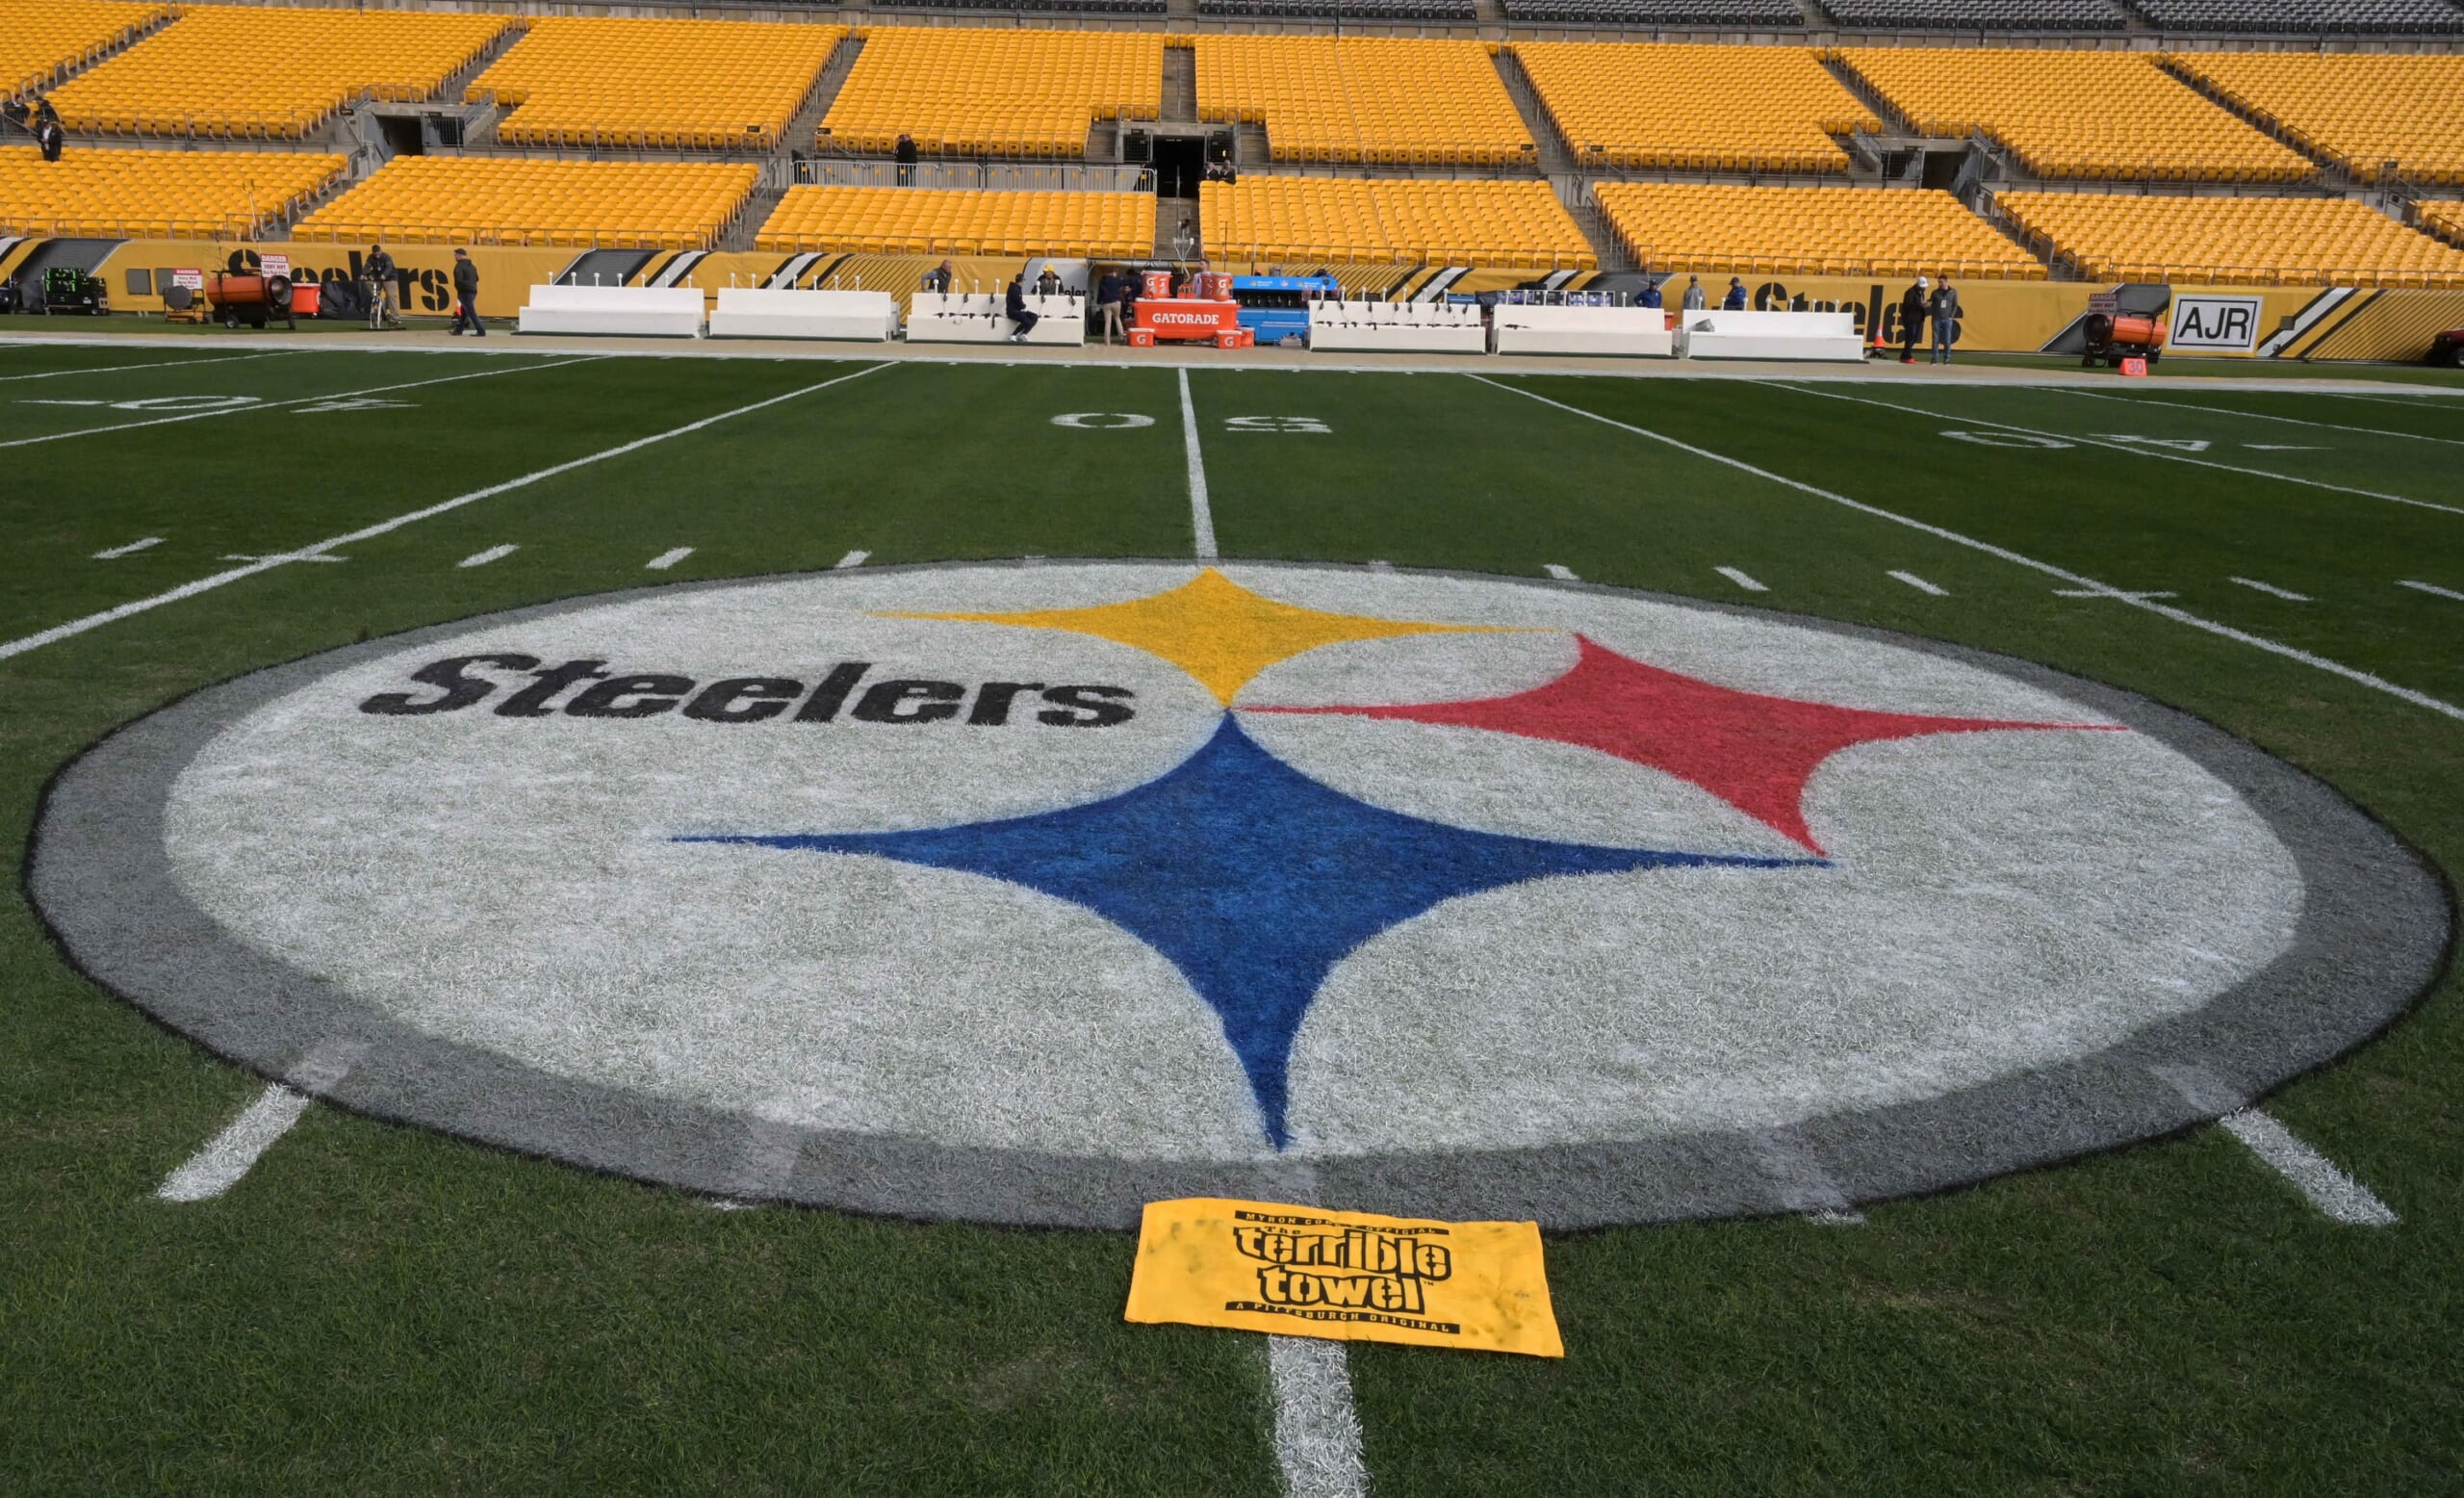 NFL schedule: Steelers-Titans game will be played in Week 7